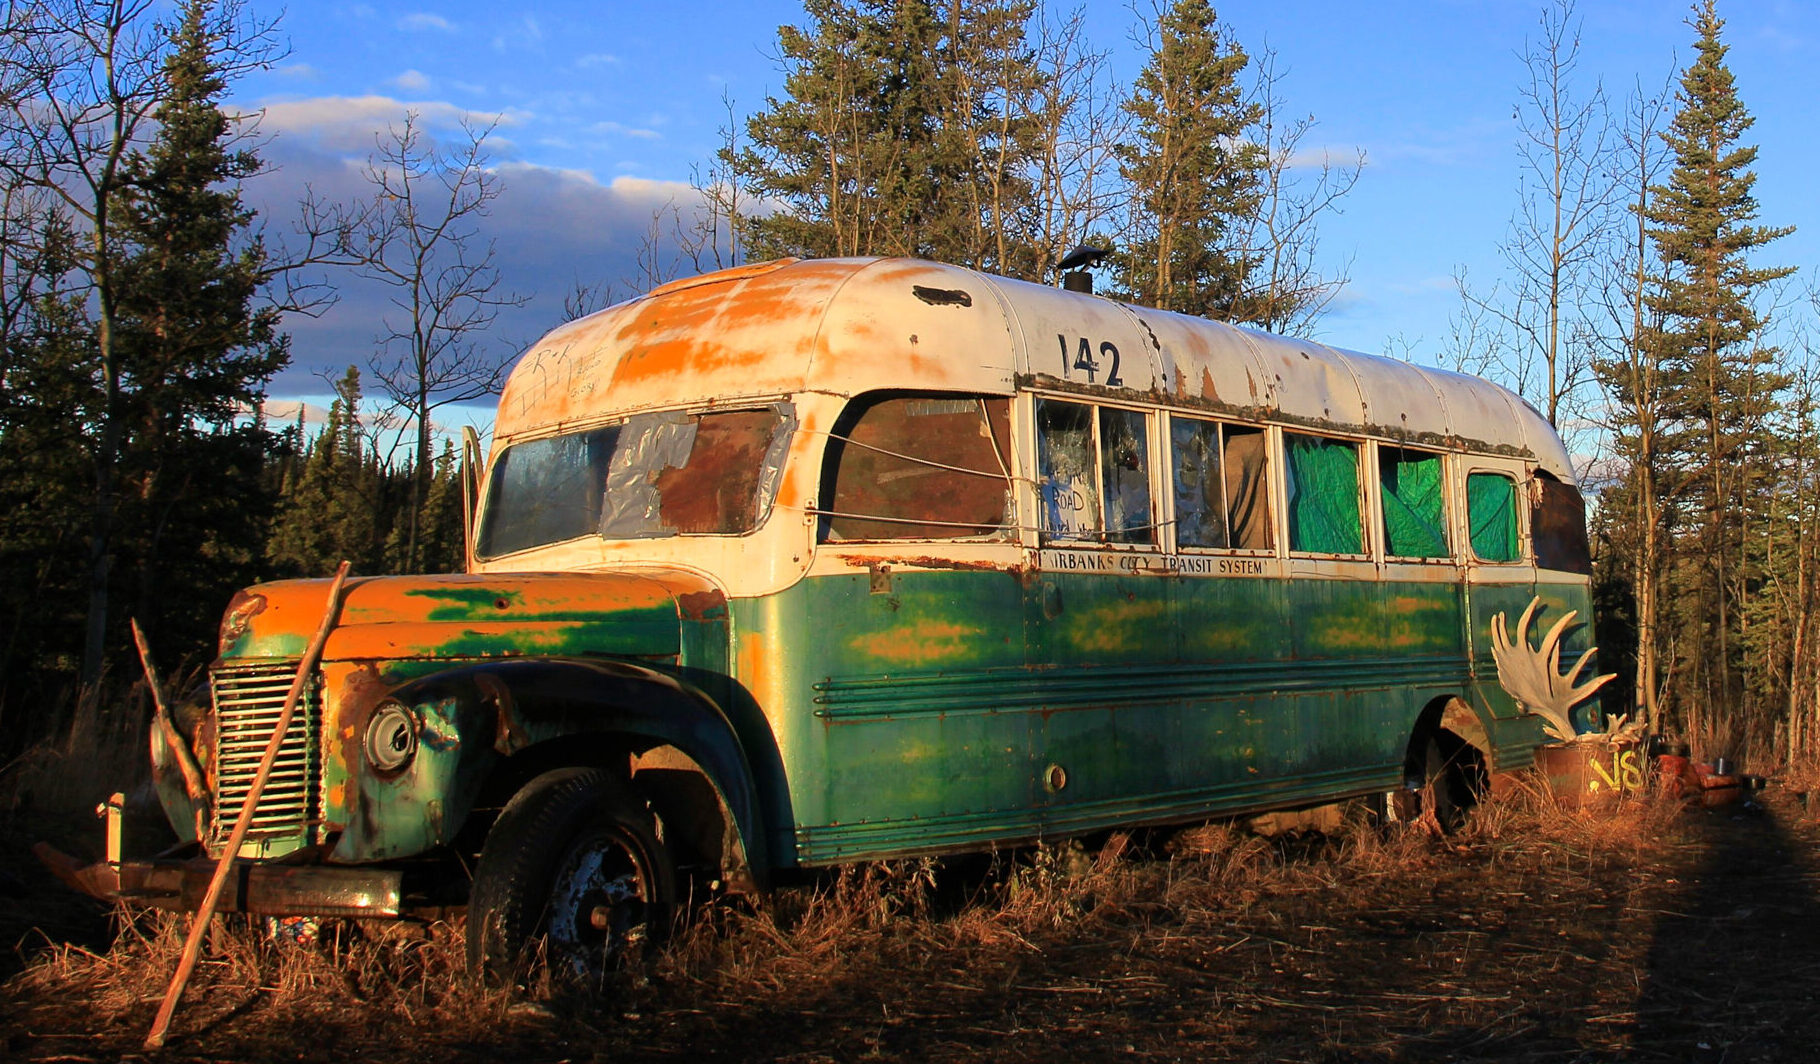 Bus 142 as a hunting camp.